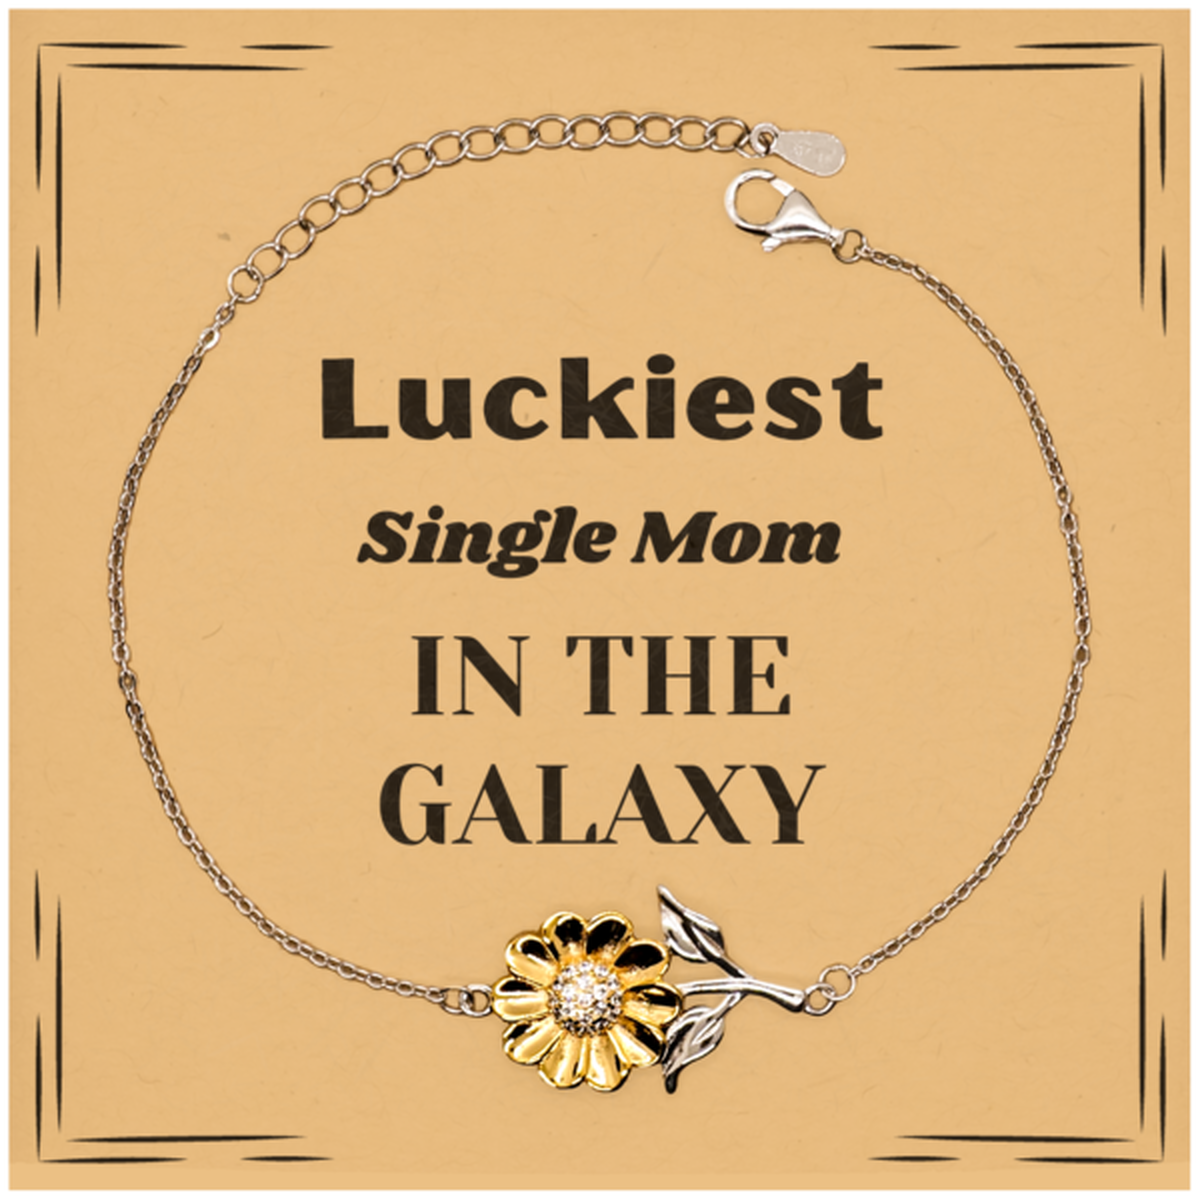 Luckiest Single Mom in the Galaxy, To My Single Mom Message Card Gifts, Christmas Single Mom Sunflower Bracelet Gifts, X-mas Birthday Unique Gifts For Single Mom Men Women